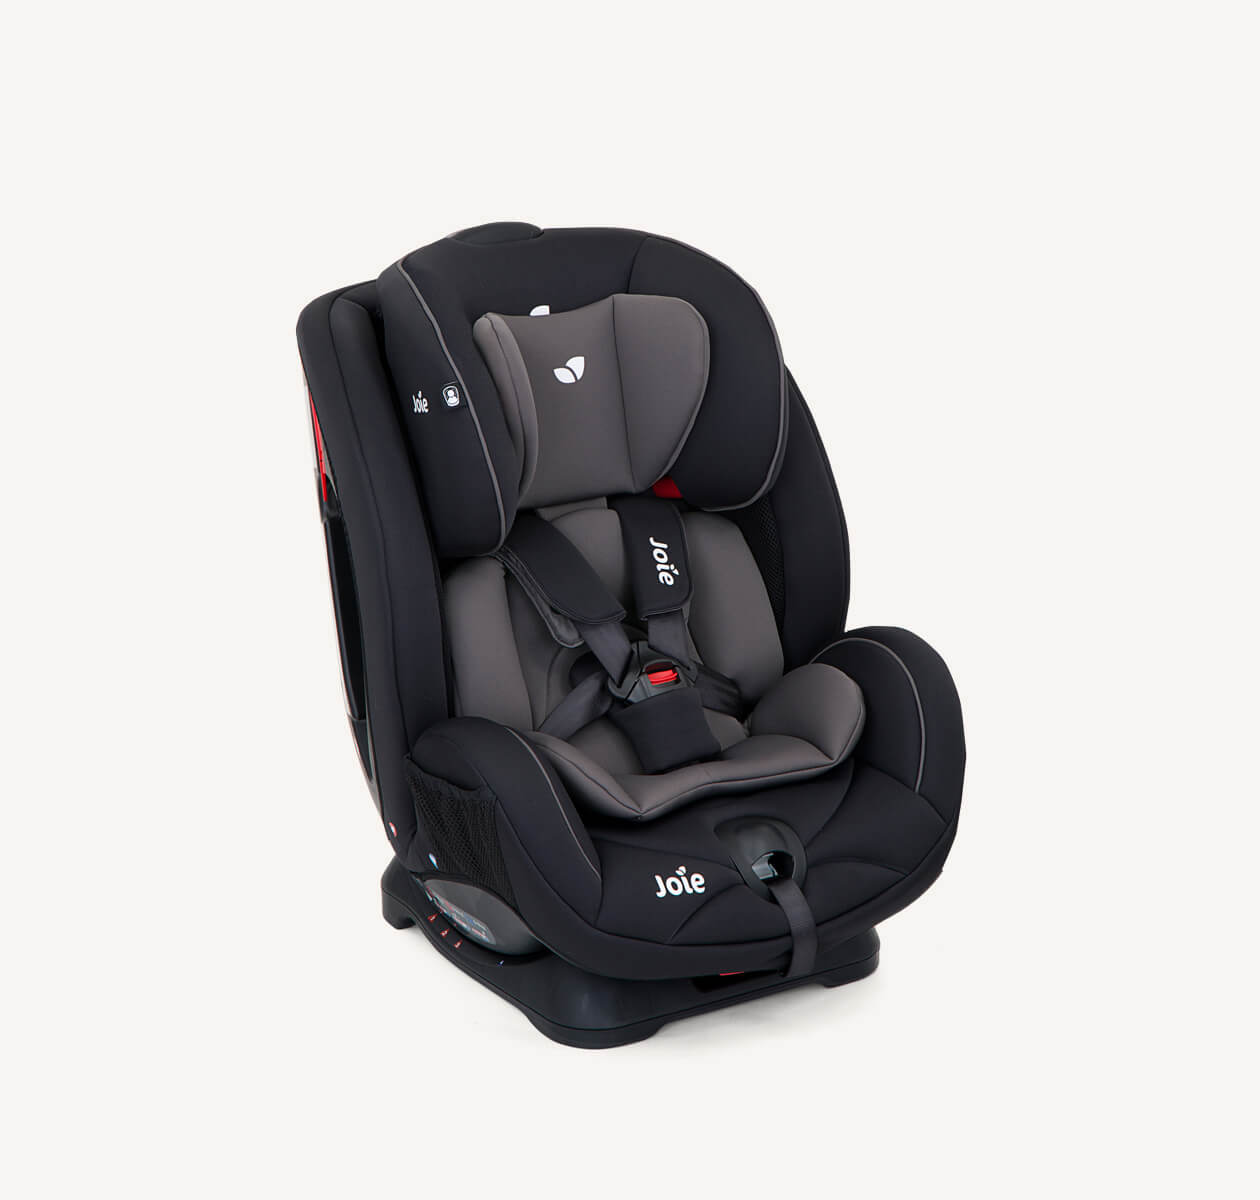 https://dd.joiebaby.com/media/catalog/product/p/1/p1-joie-toddler-child-car-seat-stages-coal-right-angle-infant.jpg?type=product&height=265&width=265